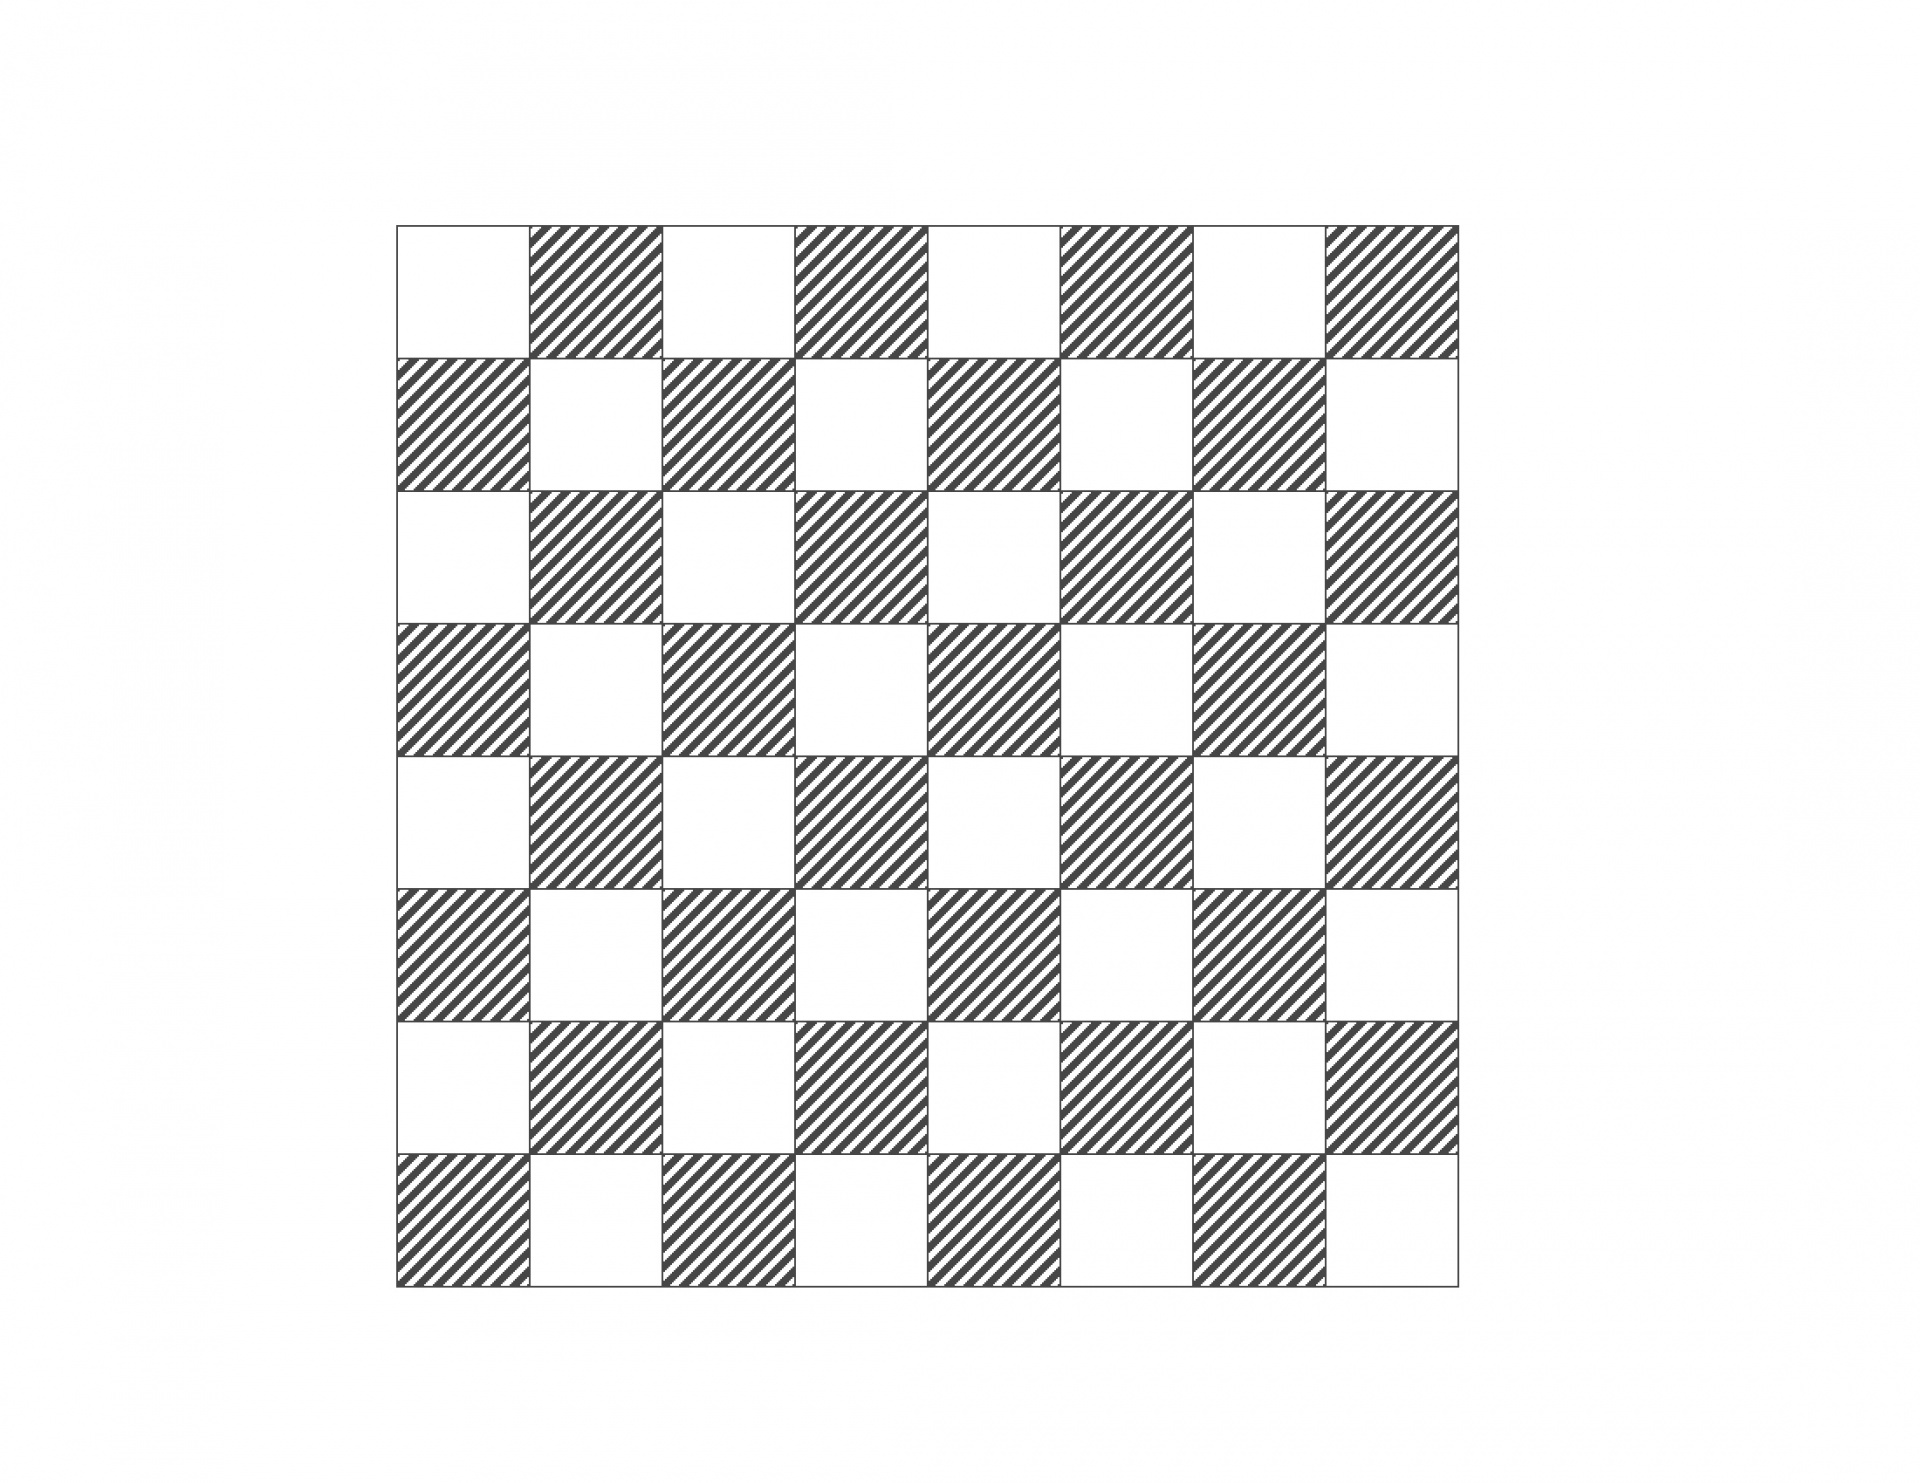 Keyword Q&A : Chess Board With Algebraic Notation Picture - Chess